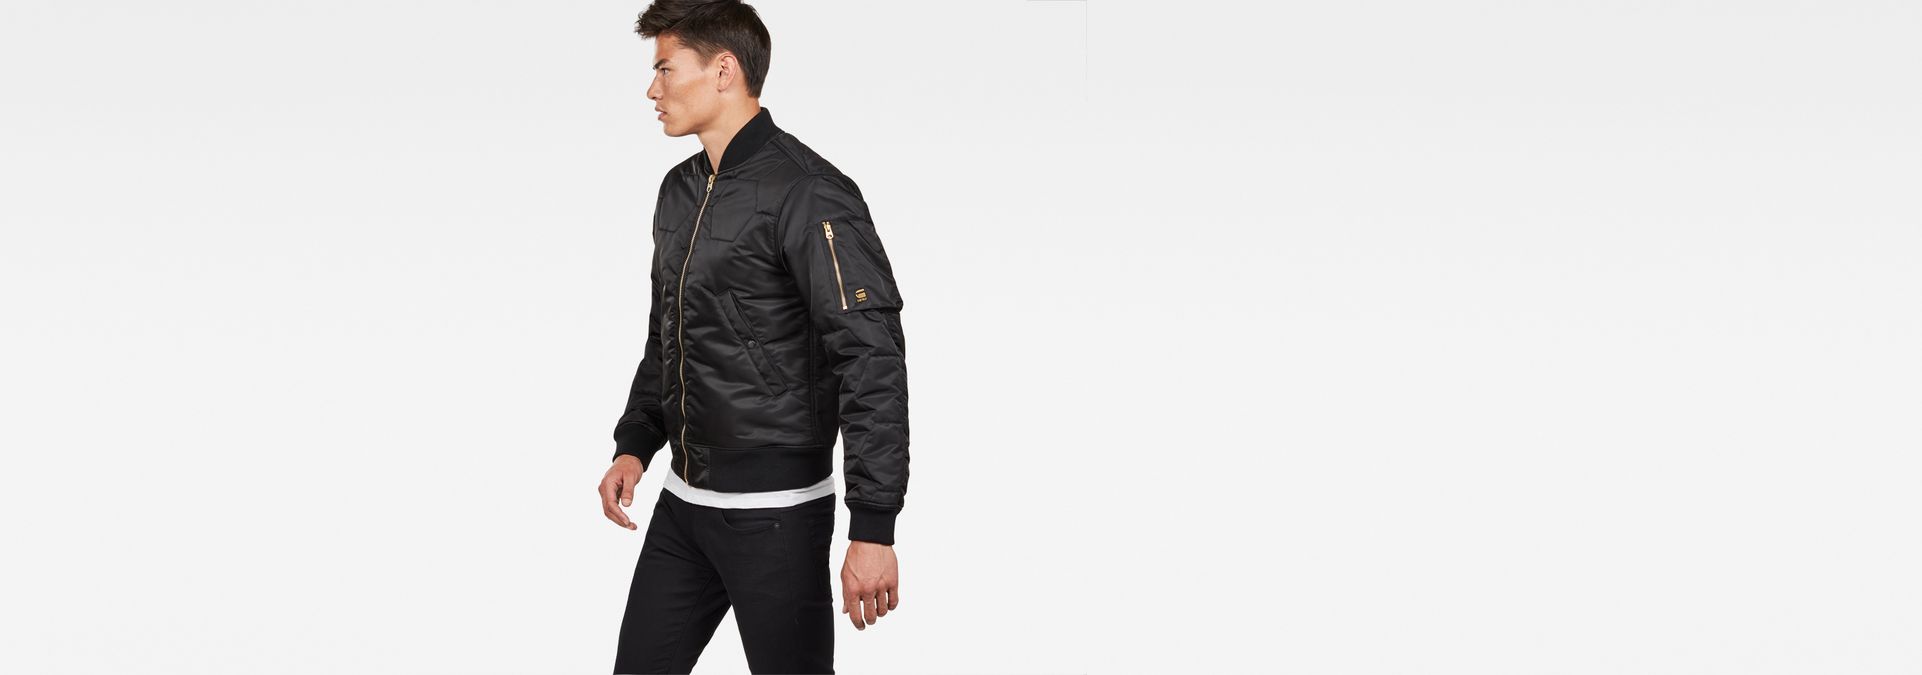 G-STAR RAW Vodan Quilted Chaqueta Bomber para Hombre 